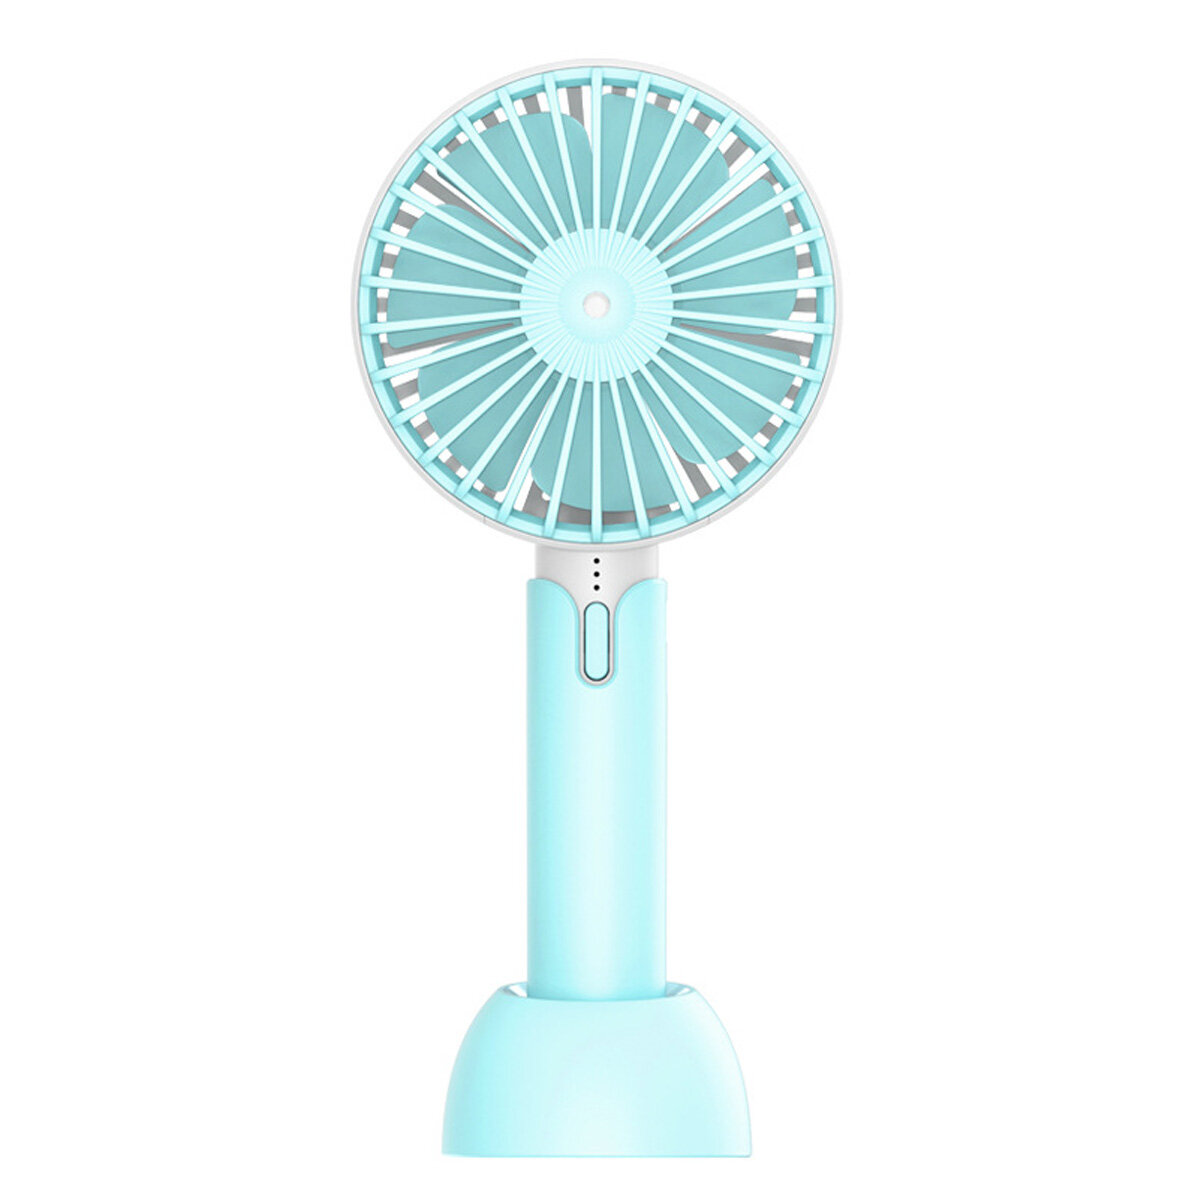 

4.5W Mini Handheld Fan 3 Modes USB Rechargeable Cooling Desk Top Travel Office Room